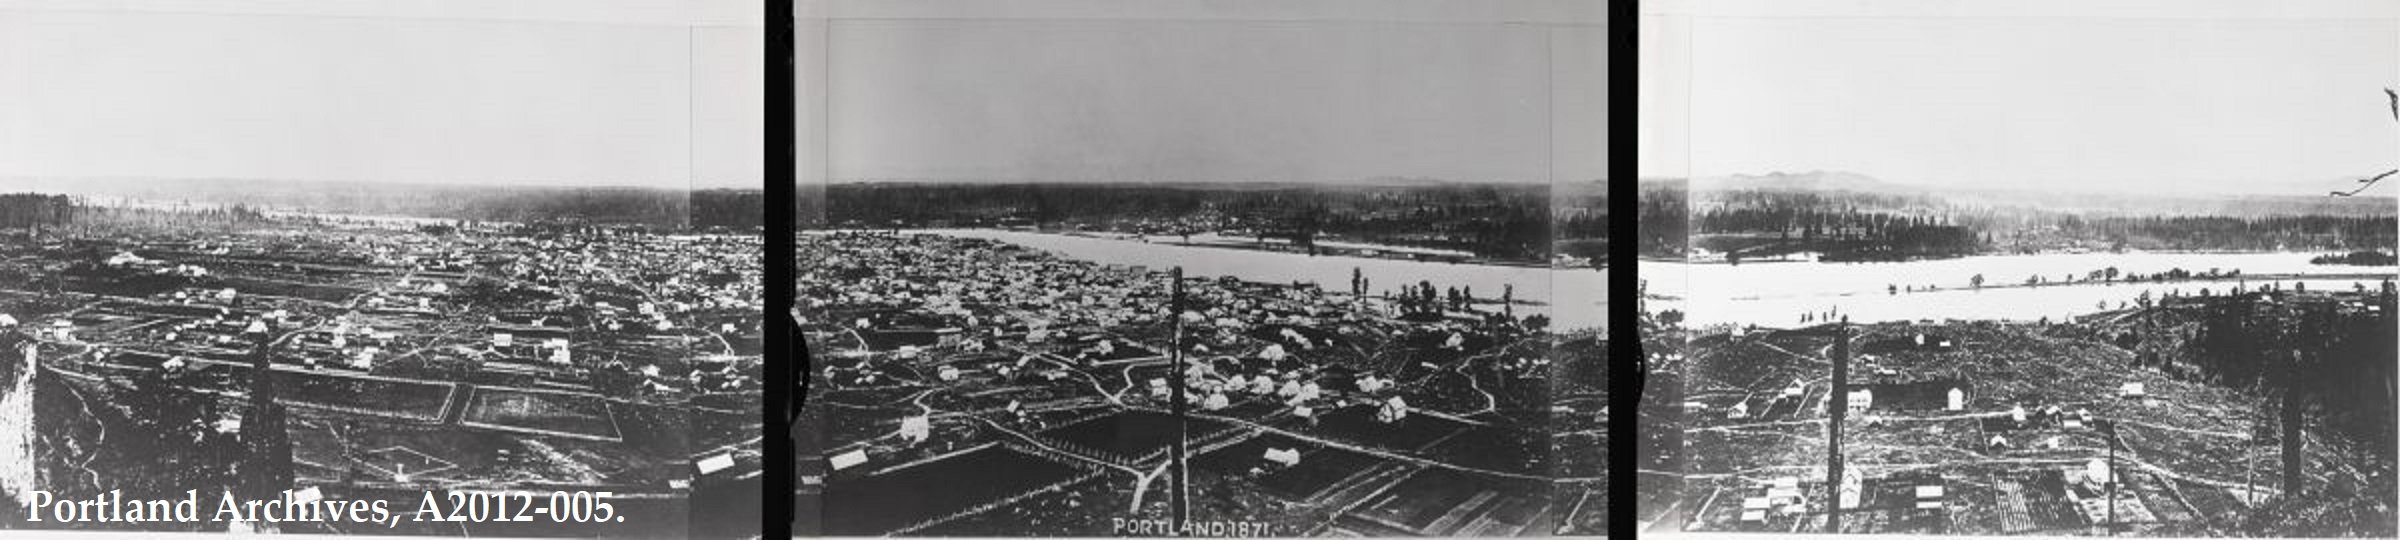 Public Works Administration (Archival) - Public Works Administrator - Photographs - A2012-005   Portland panorama (1871).JPG